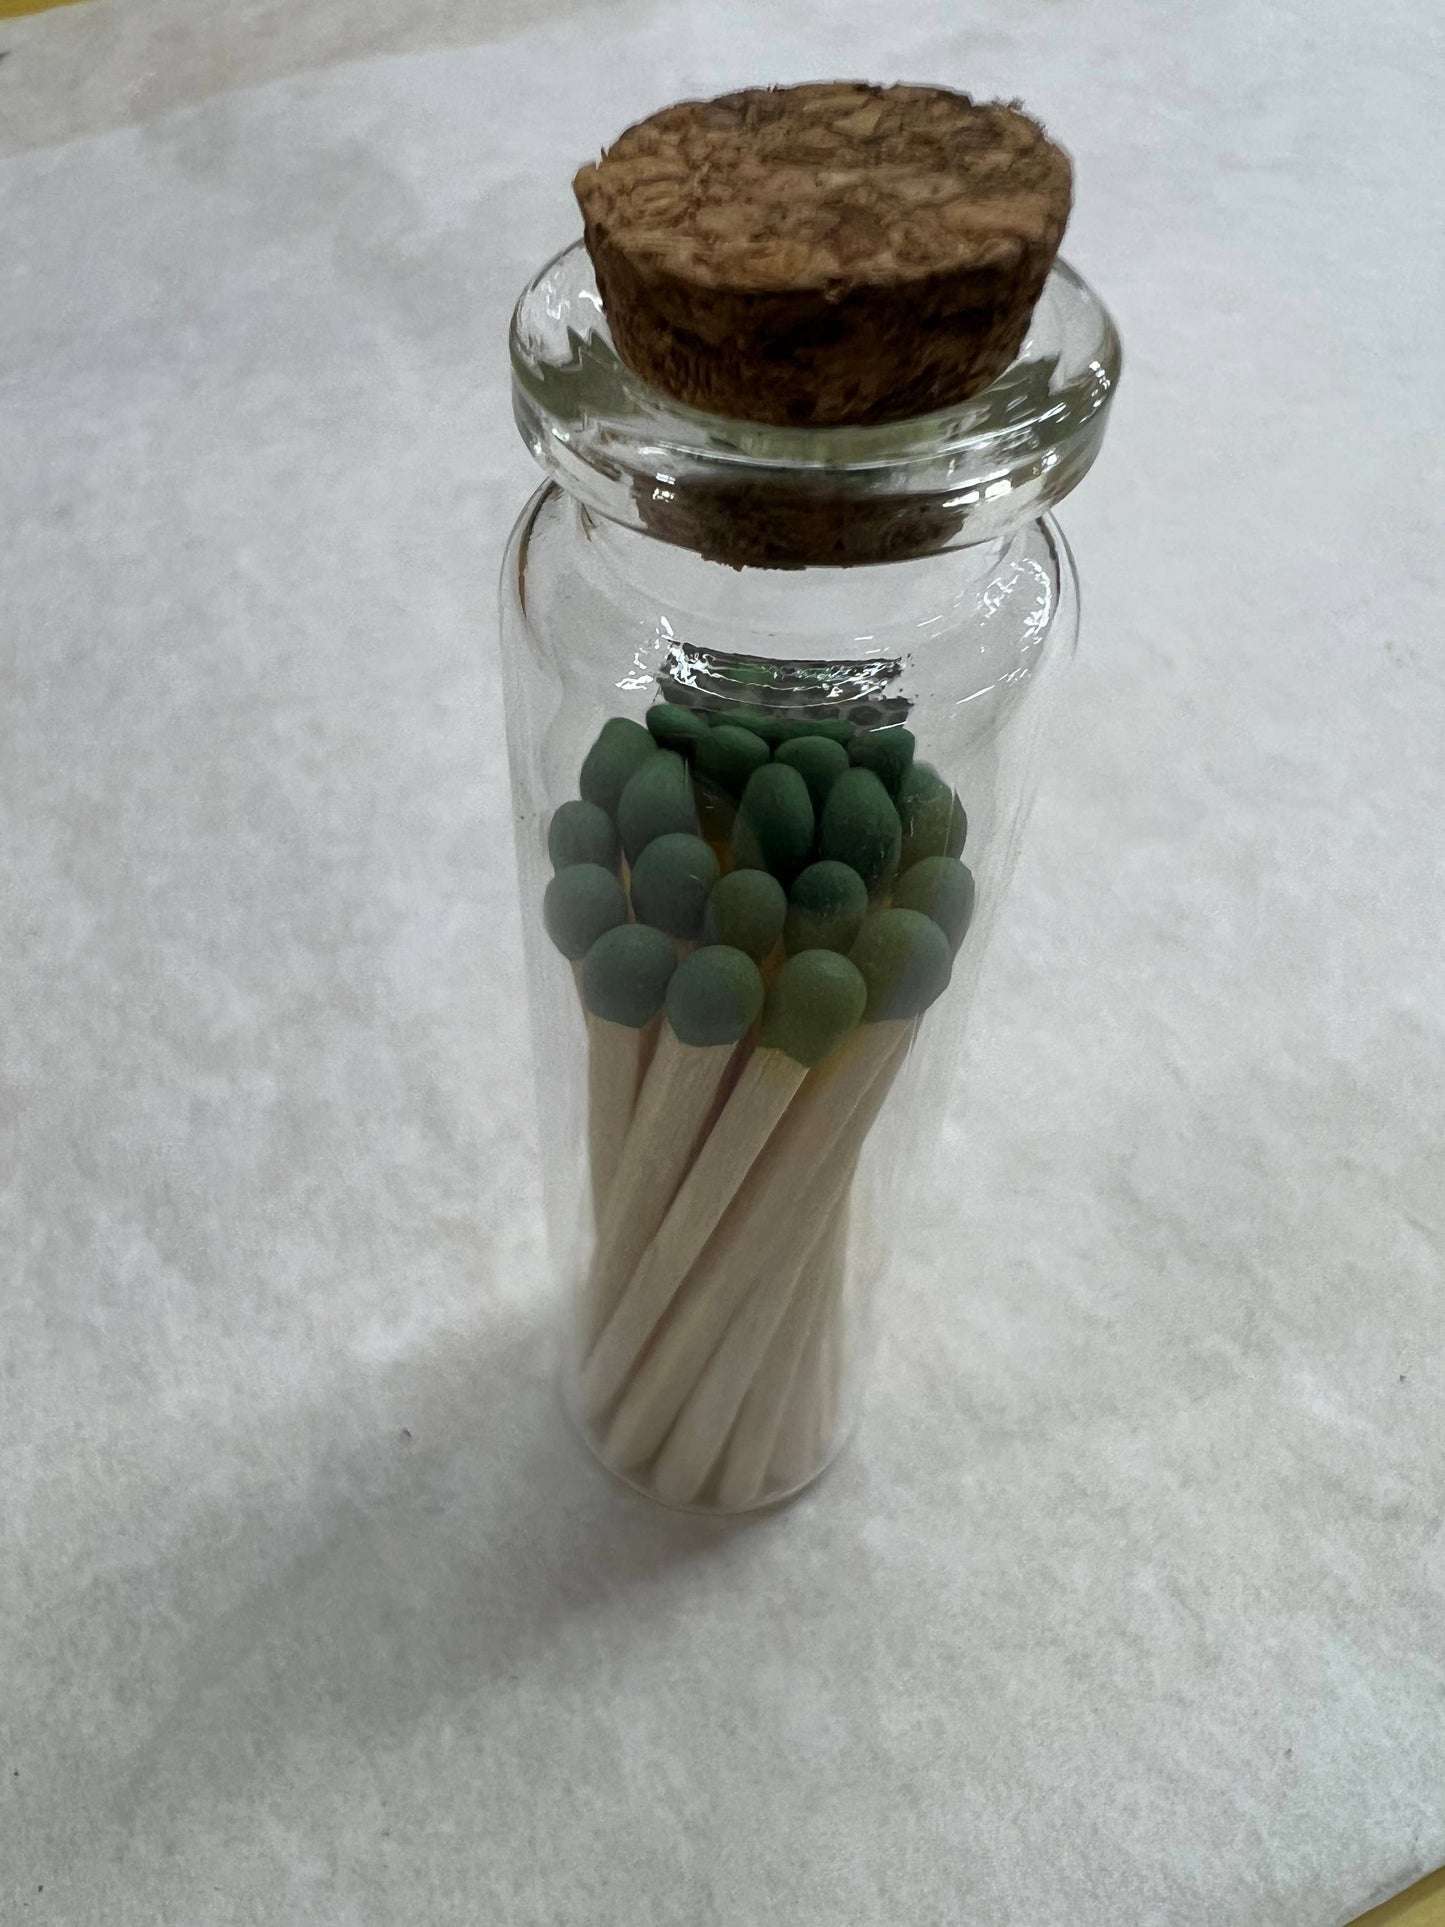 Apothecary Jar Wooden Matches